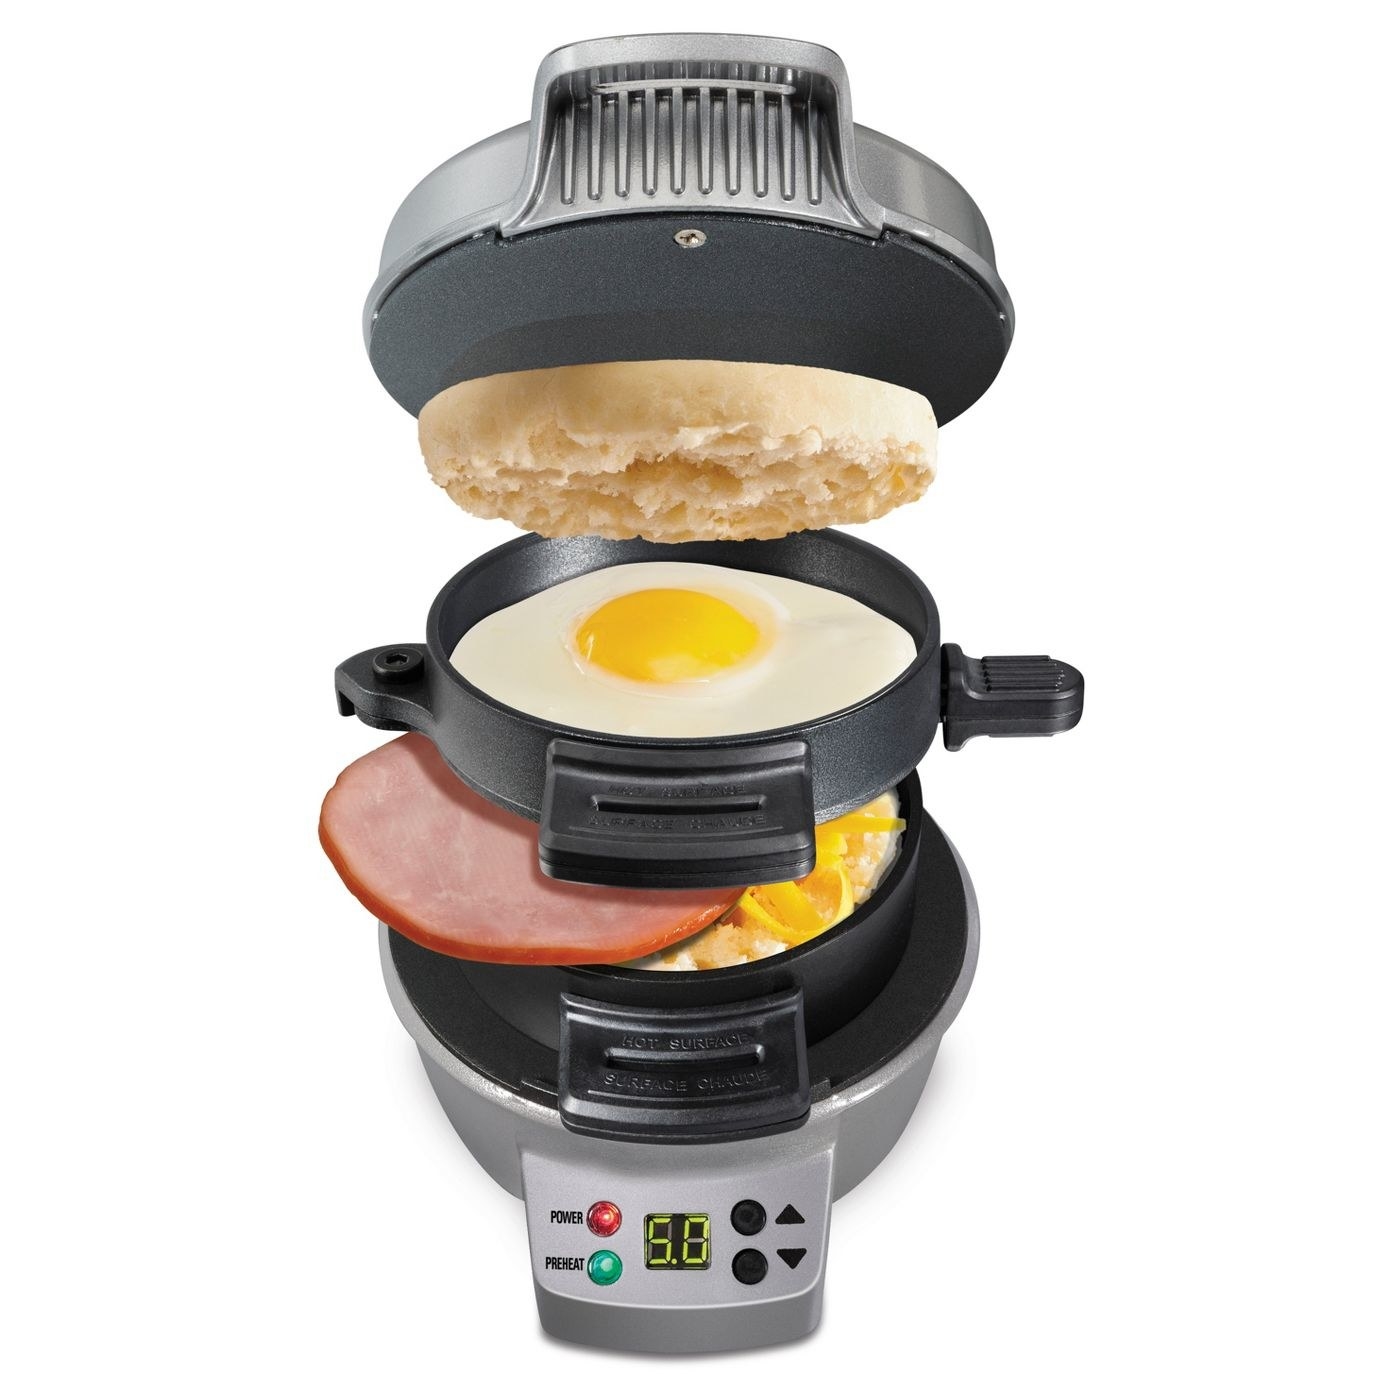 breakfast sandwich maker with egg, ham, english muffin in separate sections